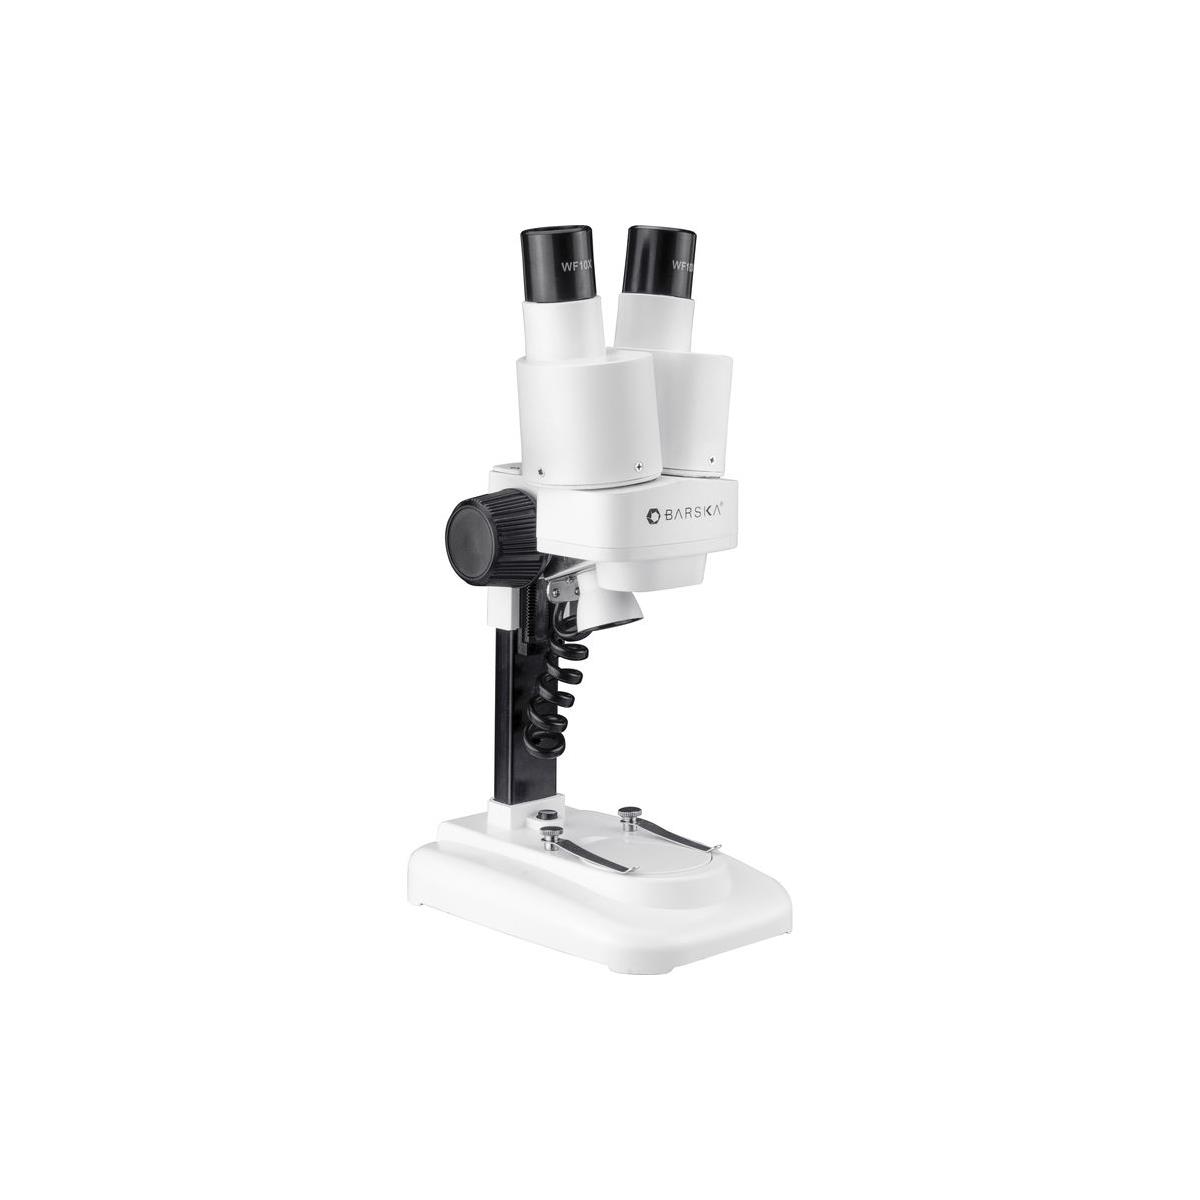 

Barska Student Stereo Microscope with 20x, 50x Magnification